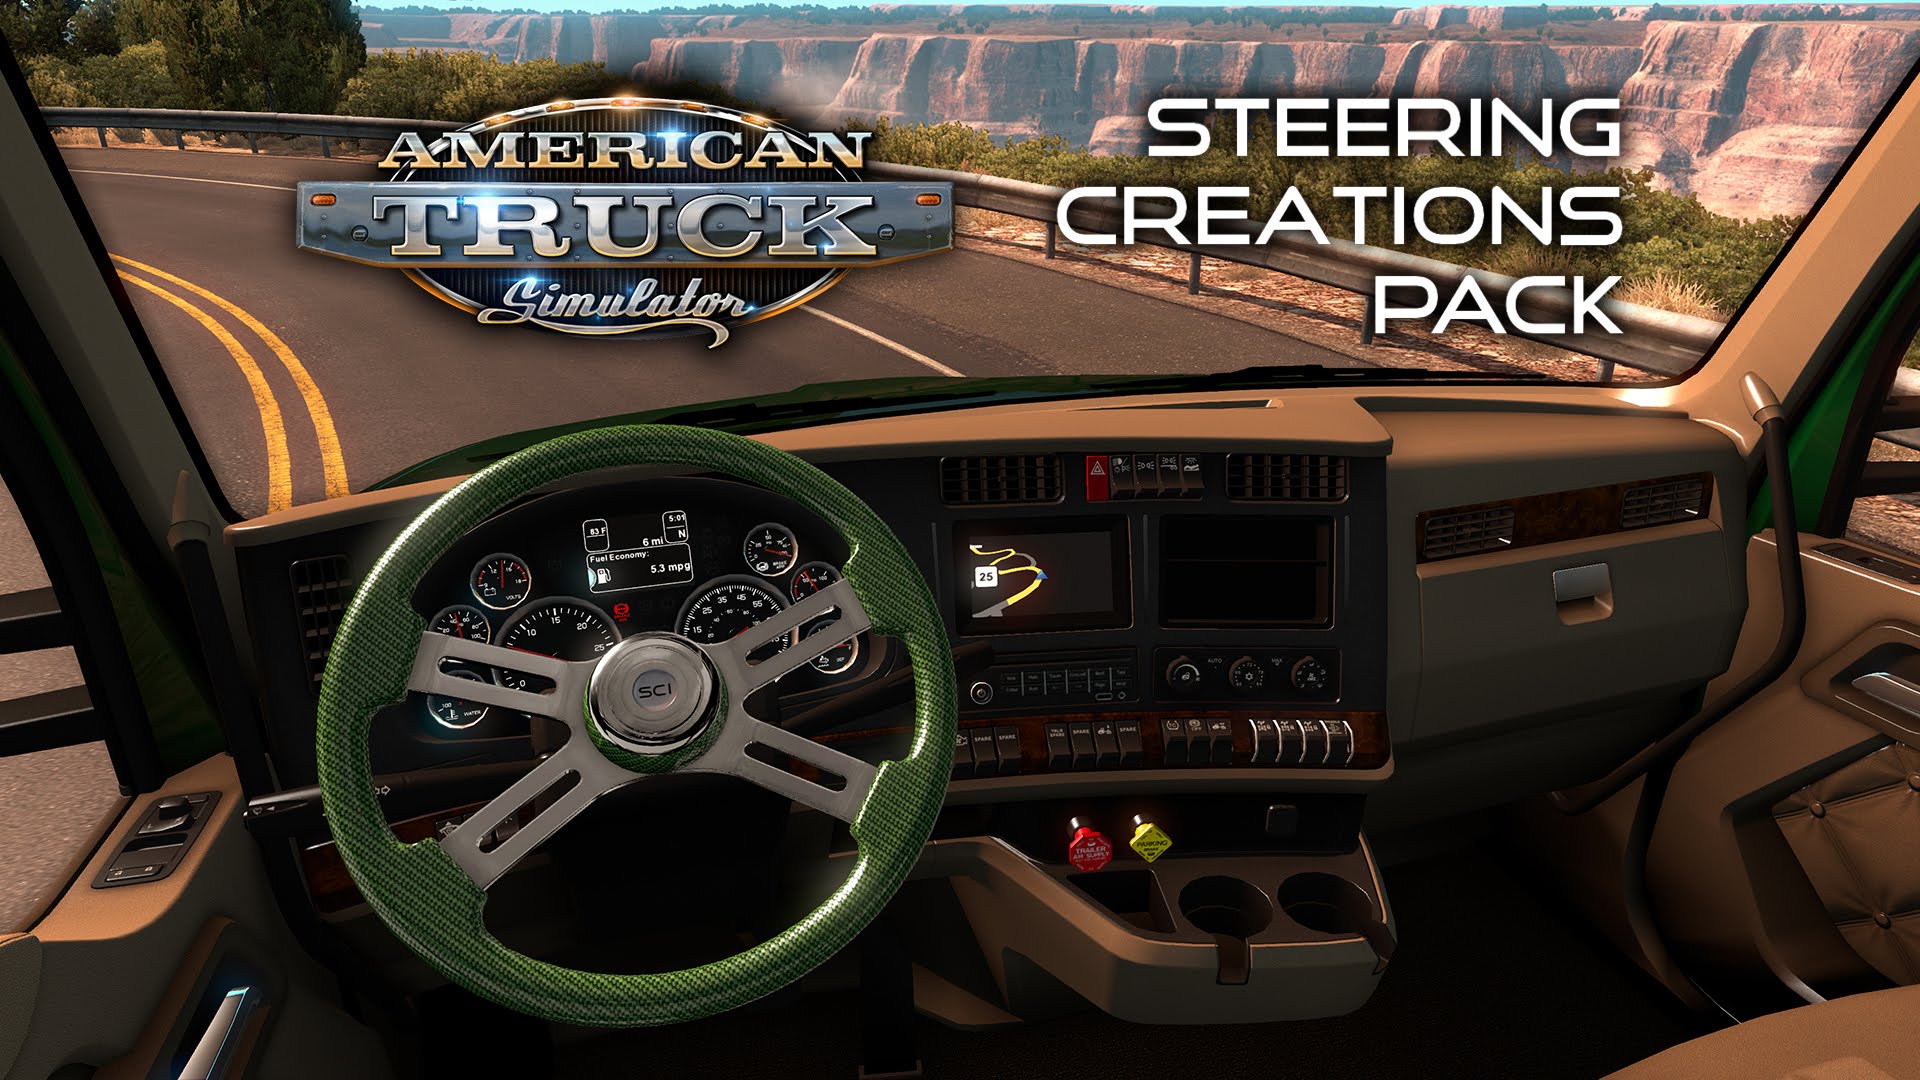 Steering Creations Pack DLC for ATS